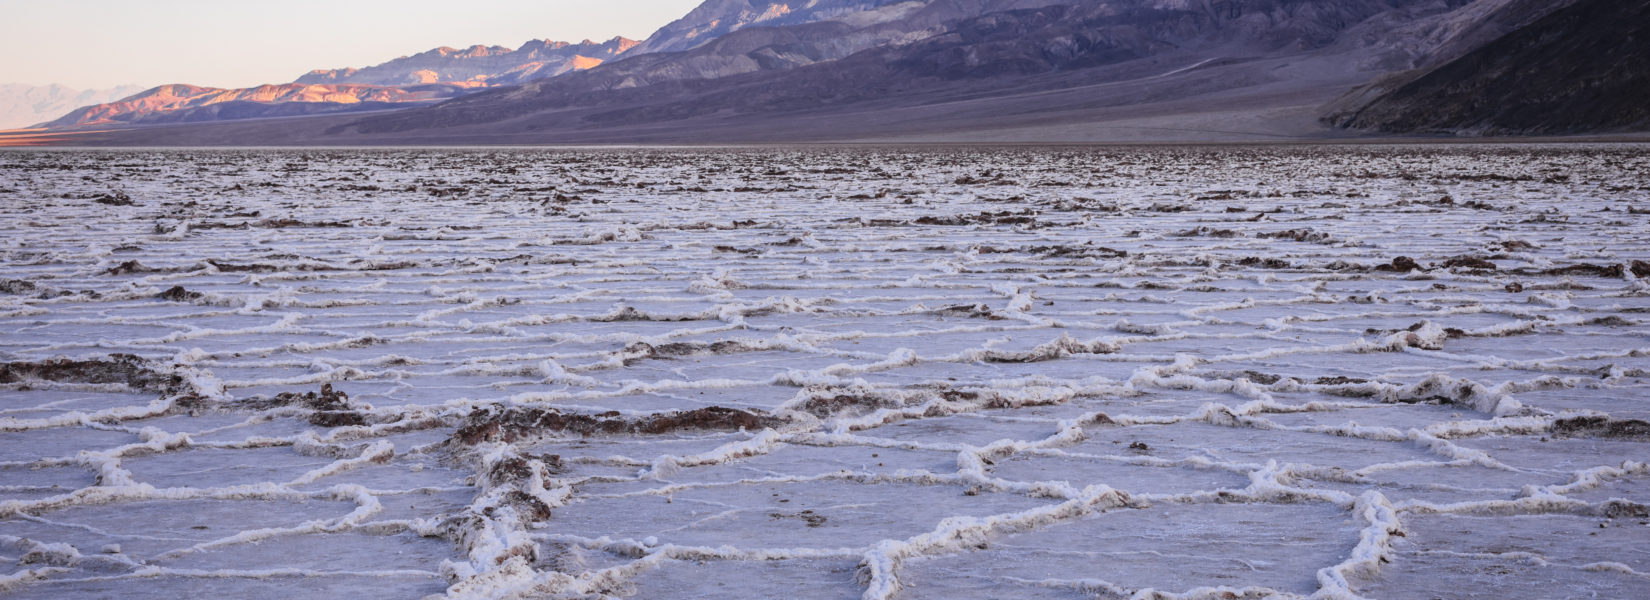 Badwater Basin – Cool Adventures in the Hottest Place on Earth